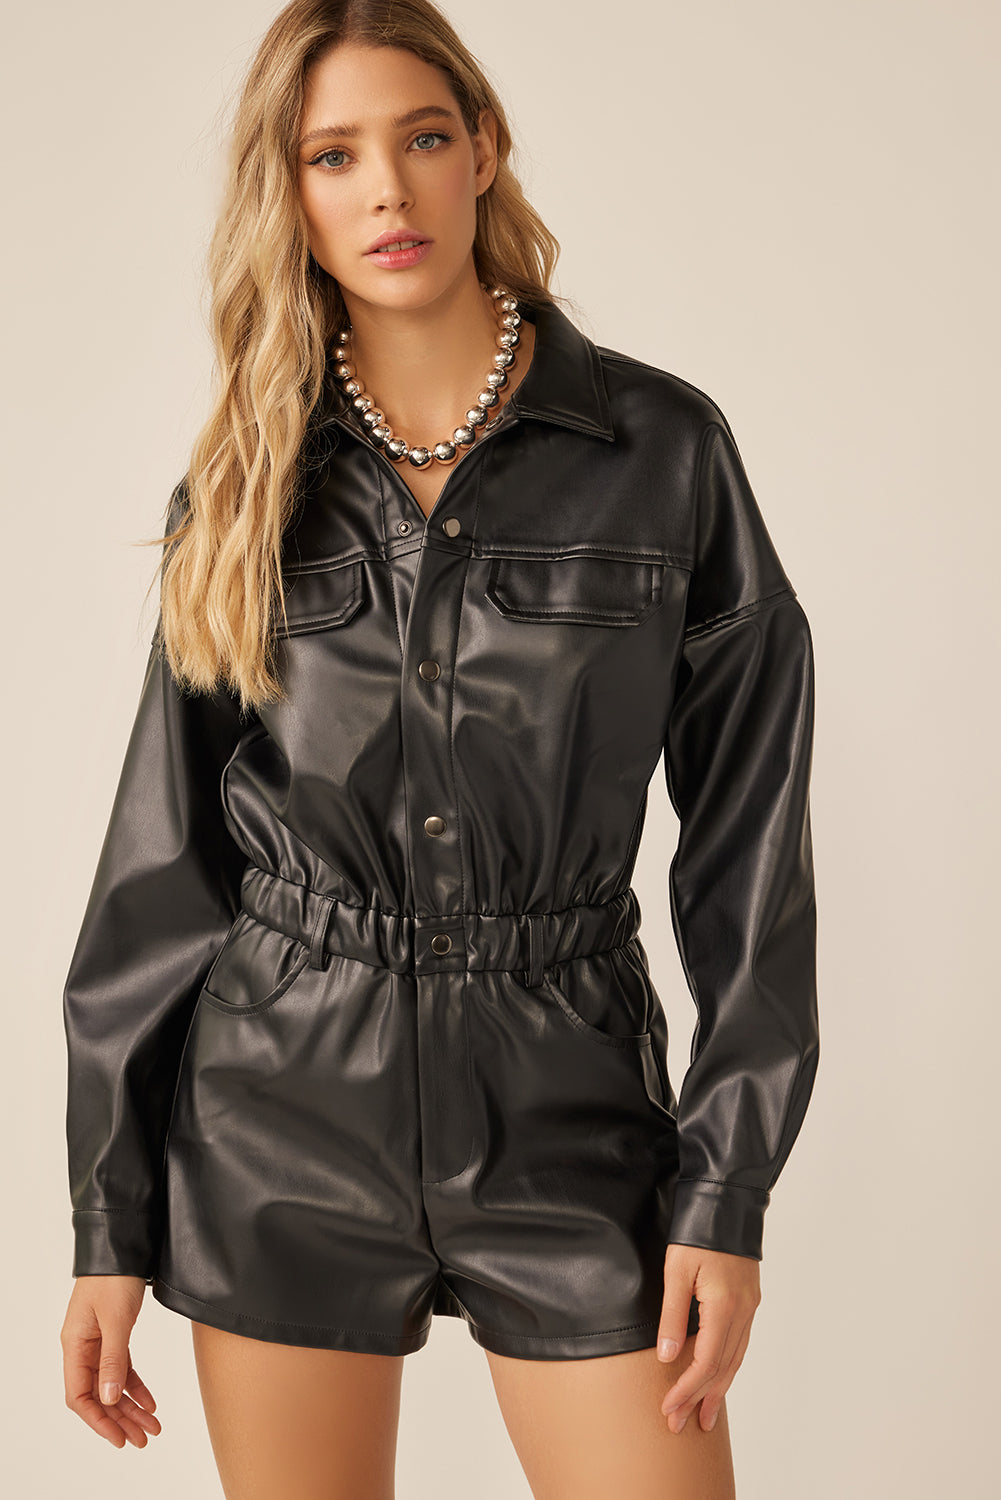 "Rodeo" Leather Romper Black